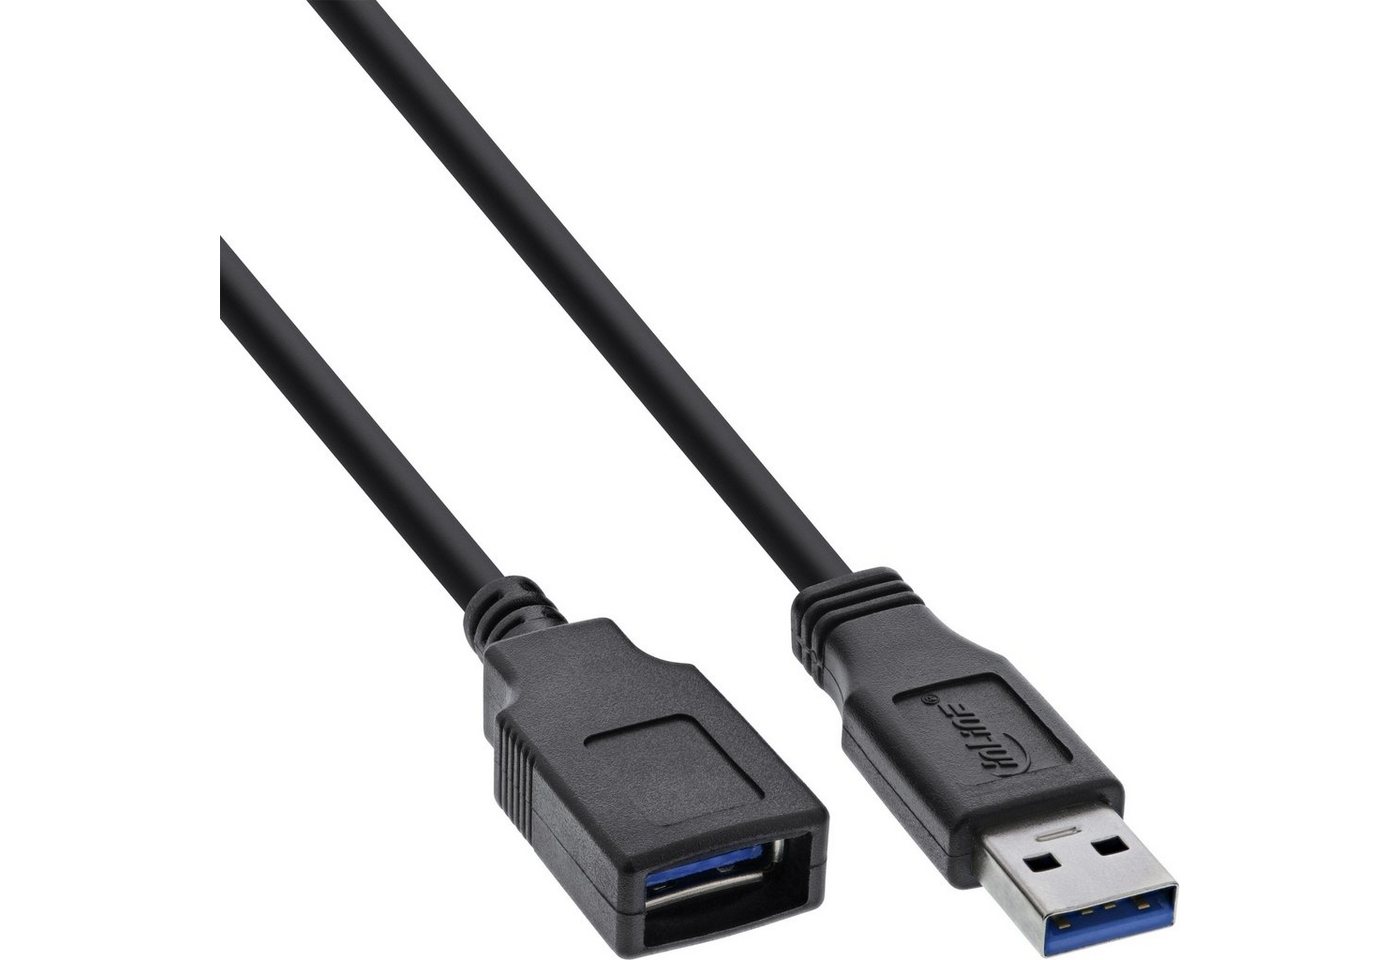 INTOS ELECTRONIC AG InLine® USB 3.0 Kabel, A Stecker / Buchse, schwarz, 1,5m USB-Kabel von INTOS ELECTRONIC AG